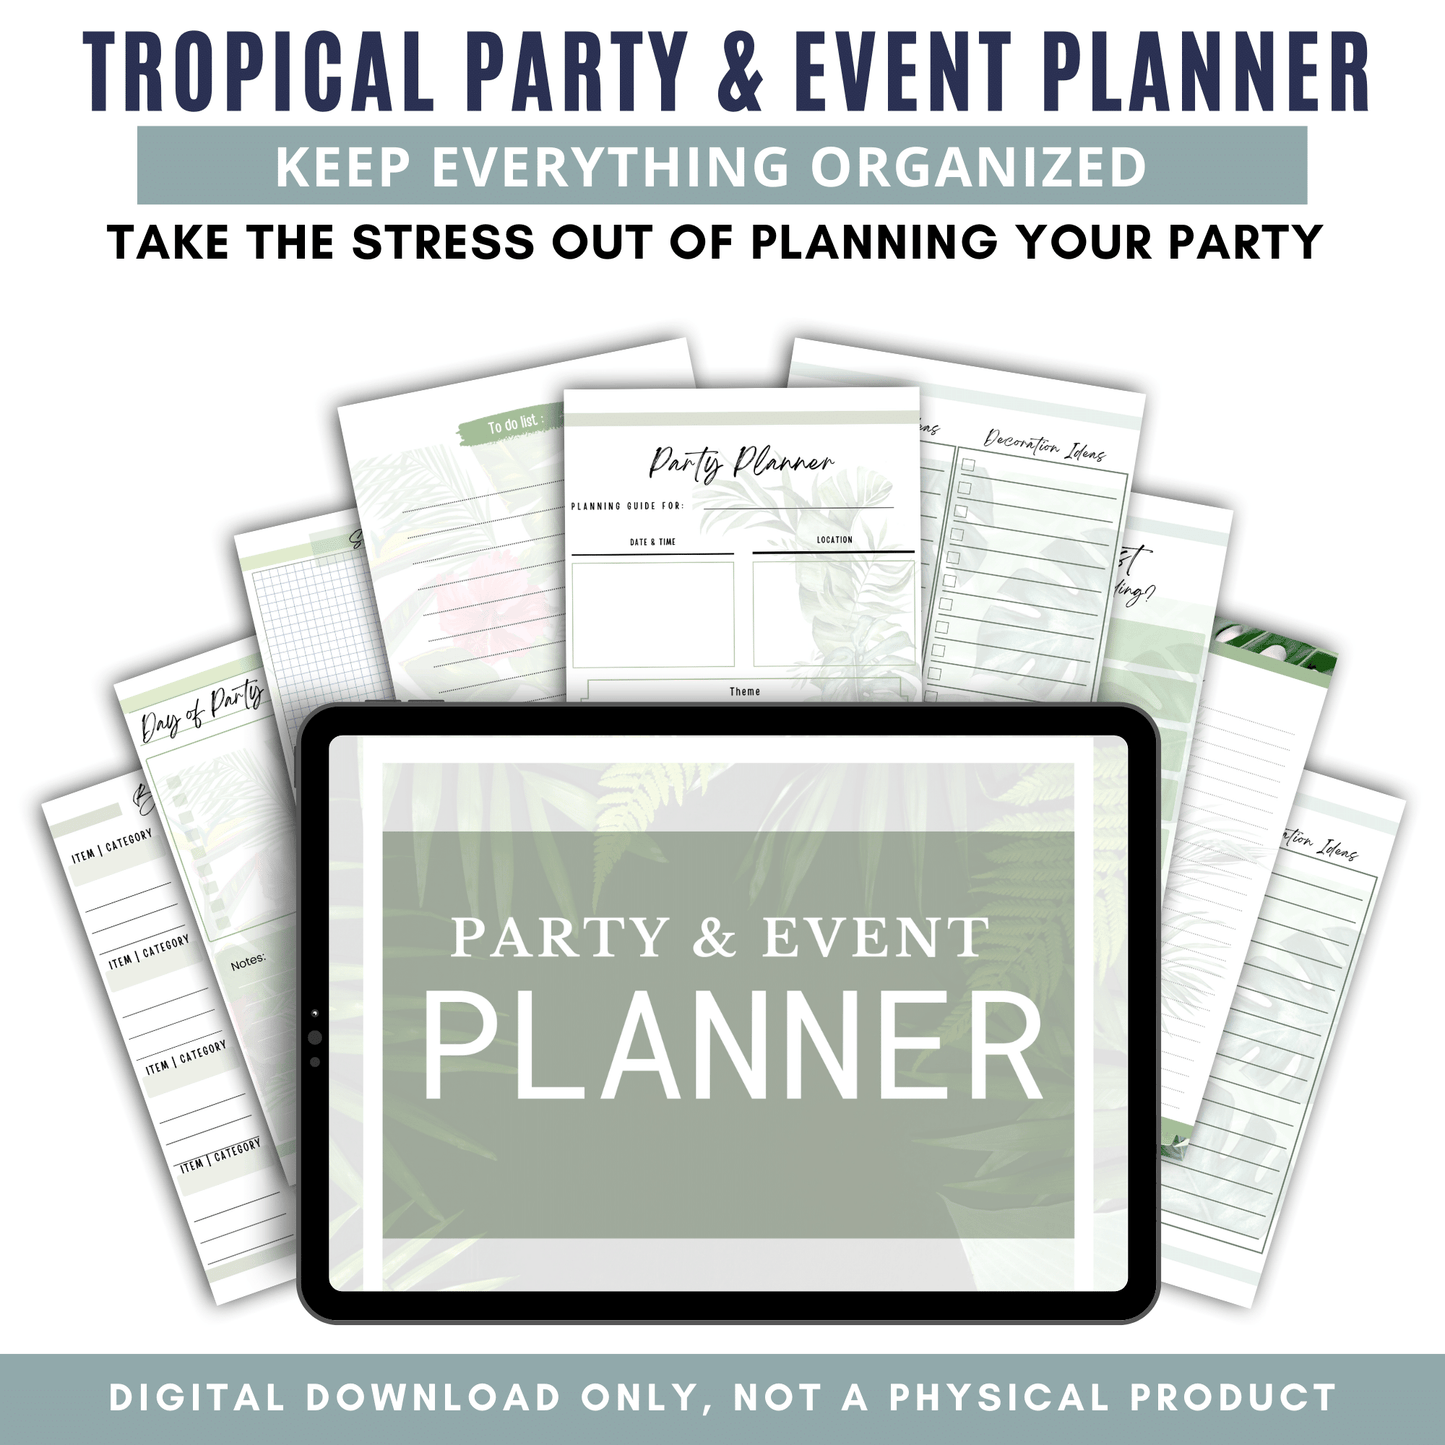 Tropical Party & Event Planner - Muted Version